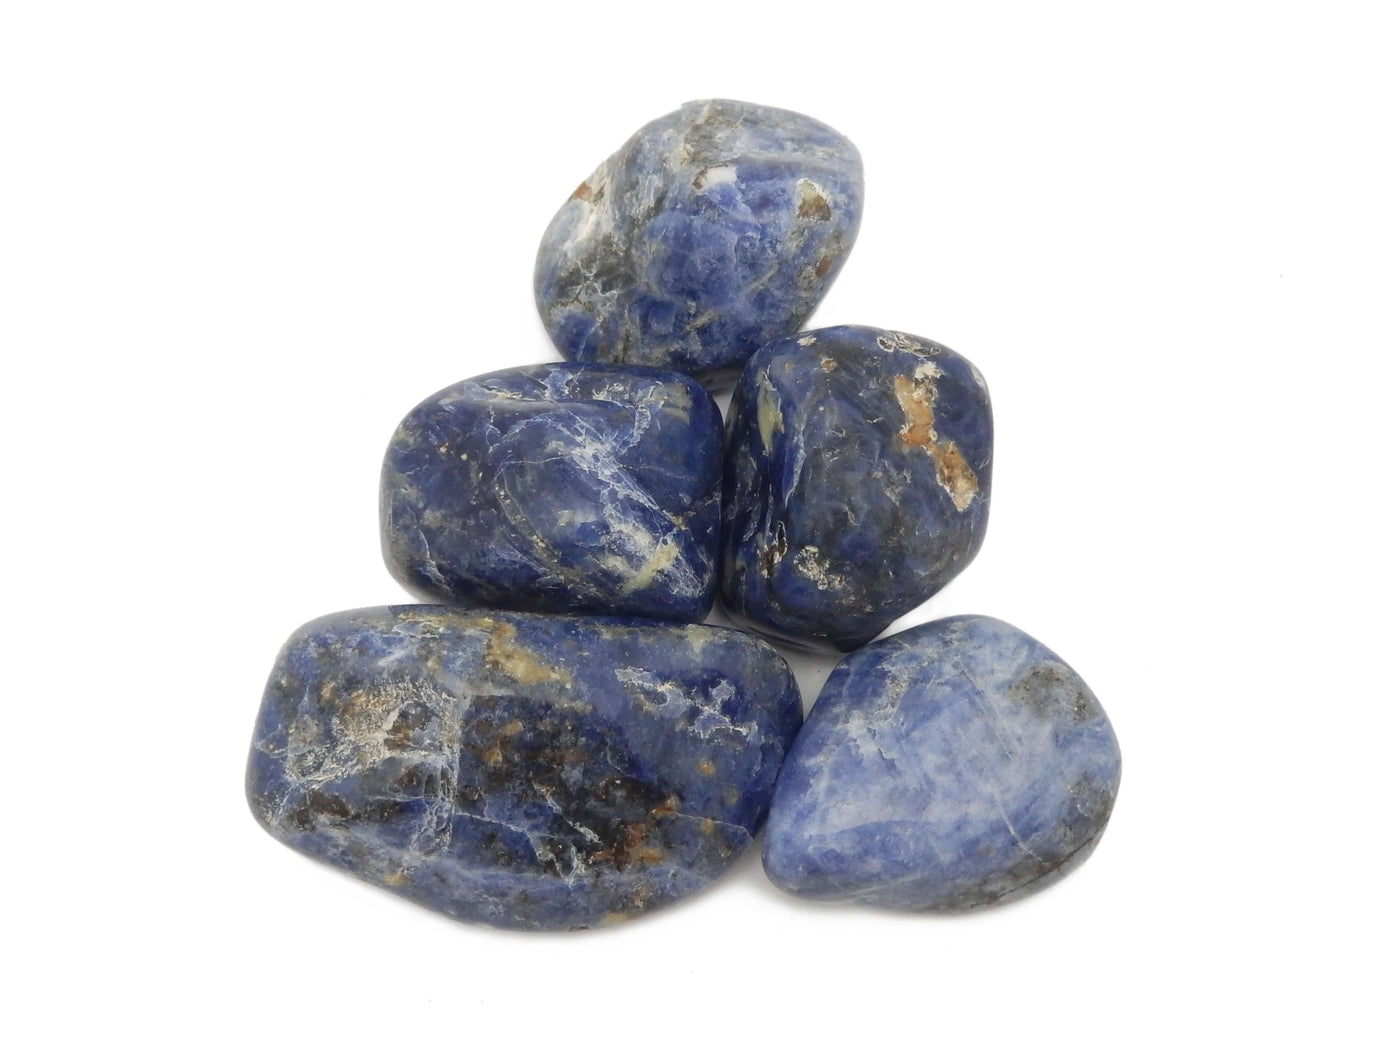 Tumbled Stones - Blue Sodalite Tumbled Stones Chips Gemstones - Large Polished Stones - Jewelry Supplies - Arts And Crafts ~ Choose 1,3,5 Pieces (TS-84)